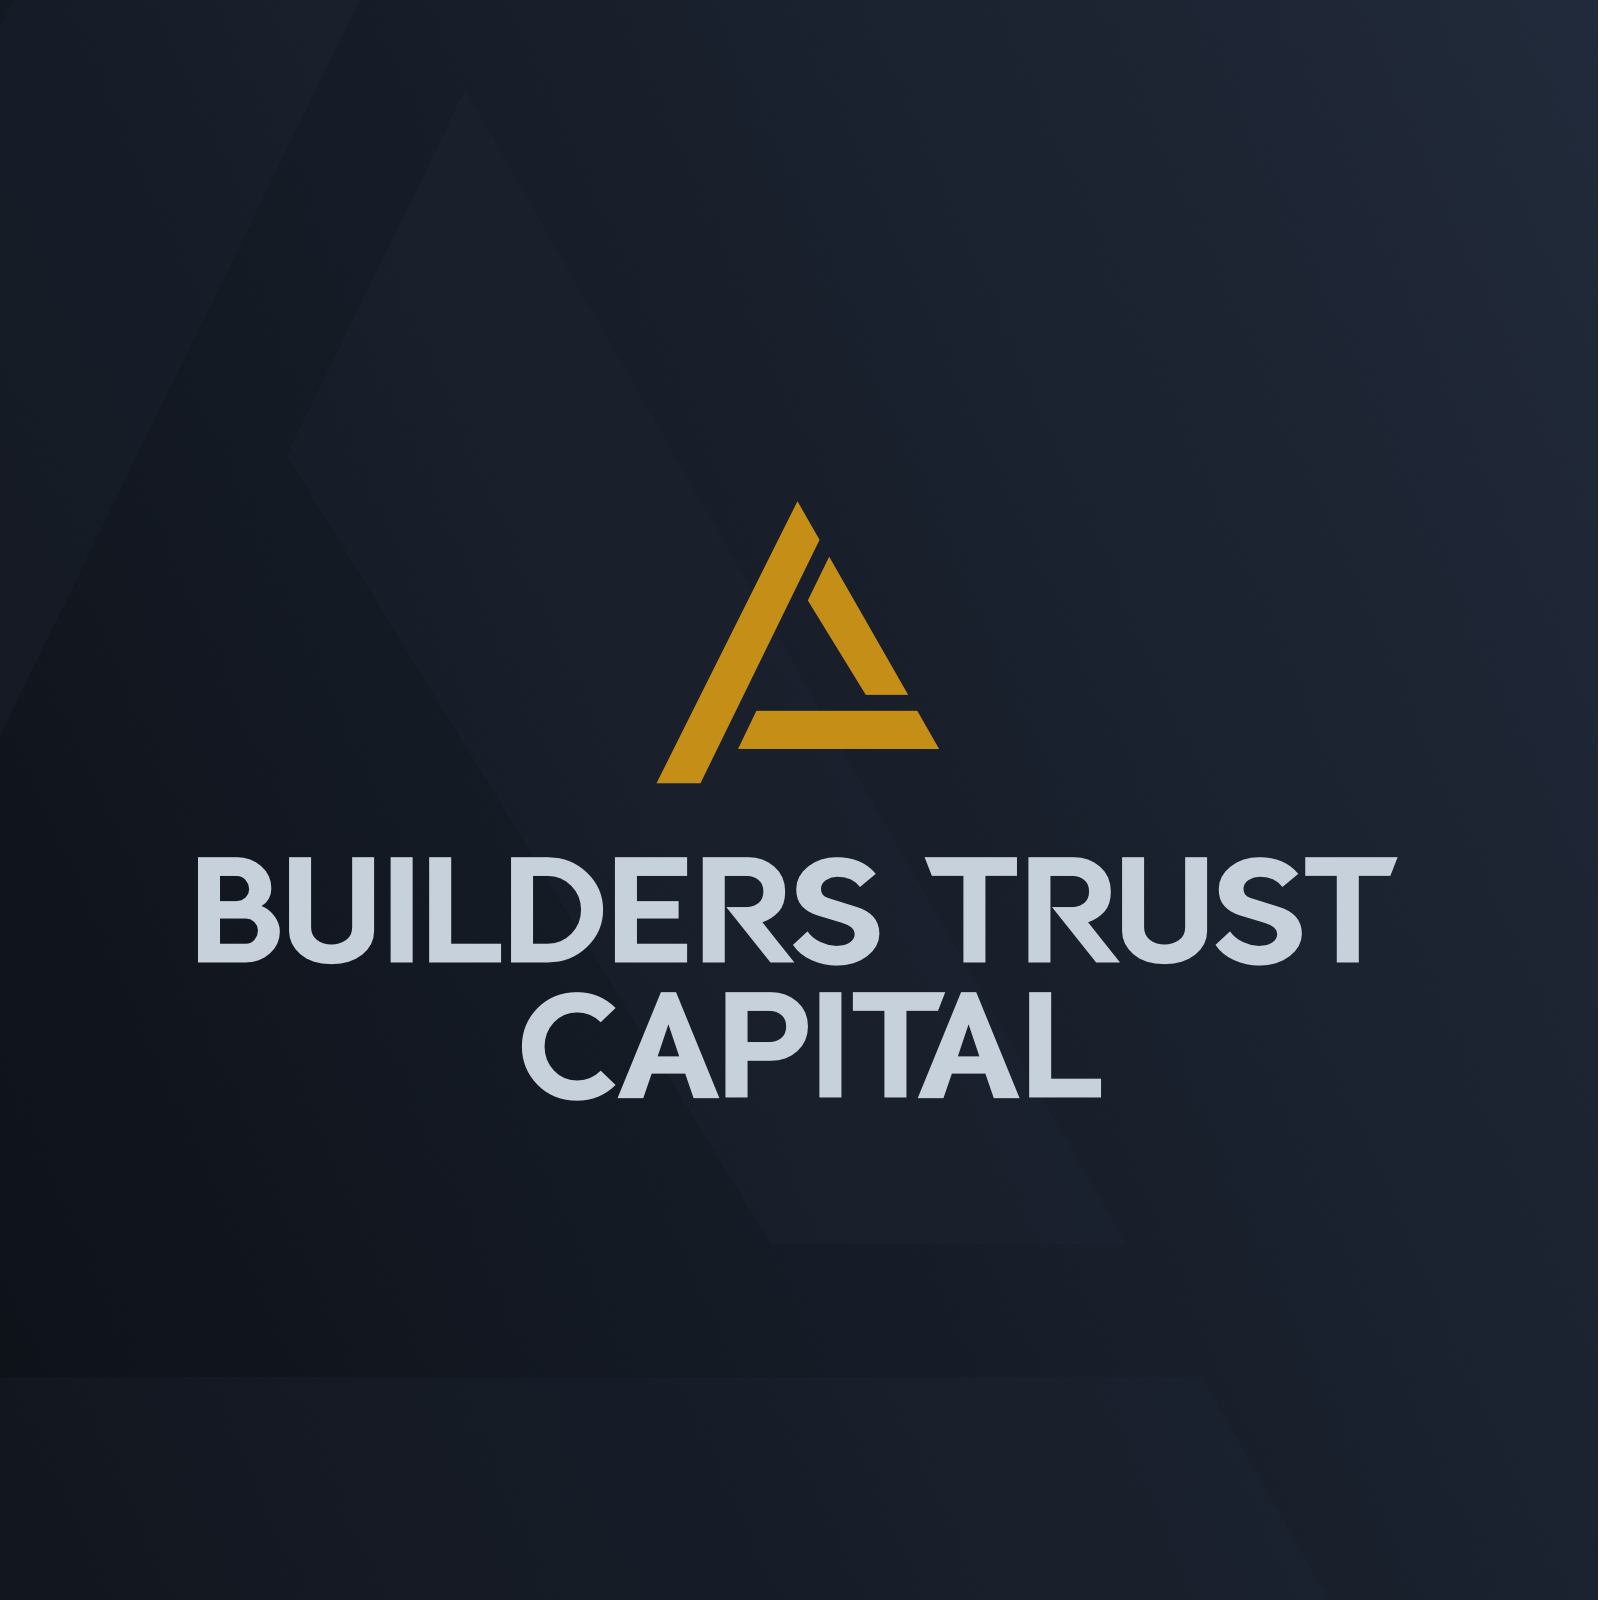 Logo presentation of the Builders Trust Capital mark and logo type